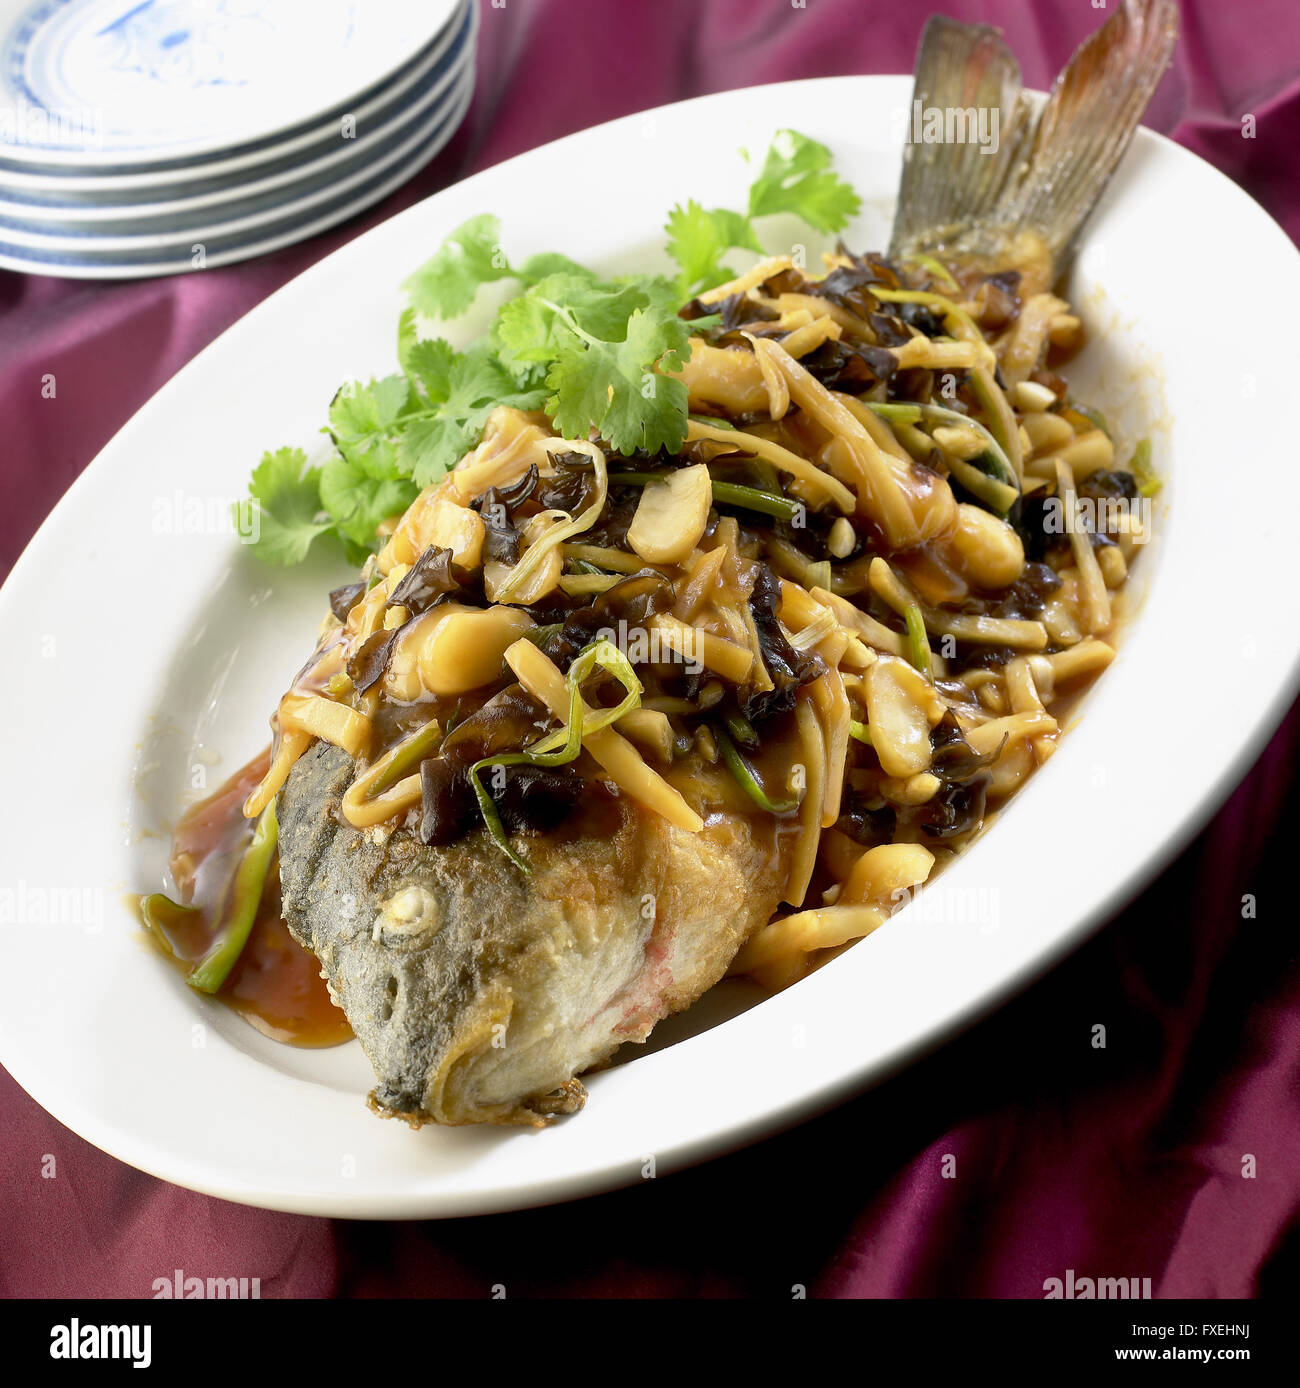 Sweet and Sour Carp, traditional Shandong dish made with Yellow River carp served on platter with vegetables and special sauce Stock Photo